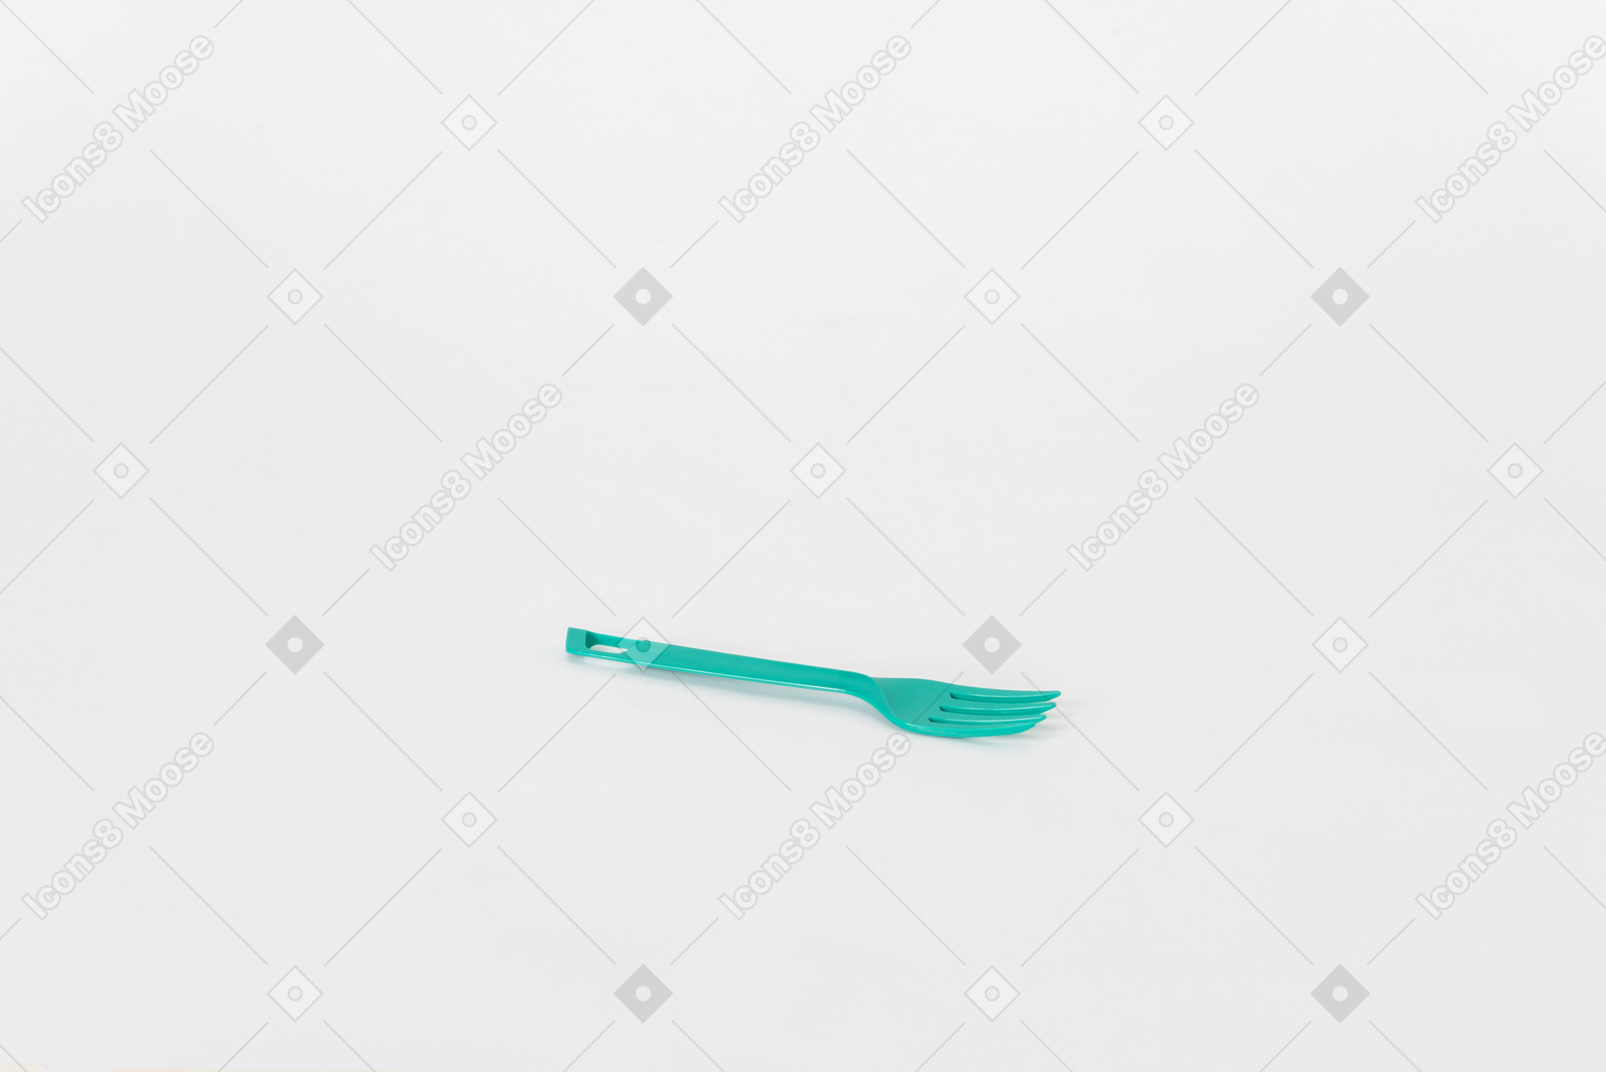 Plastic green fork on a white background